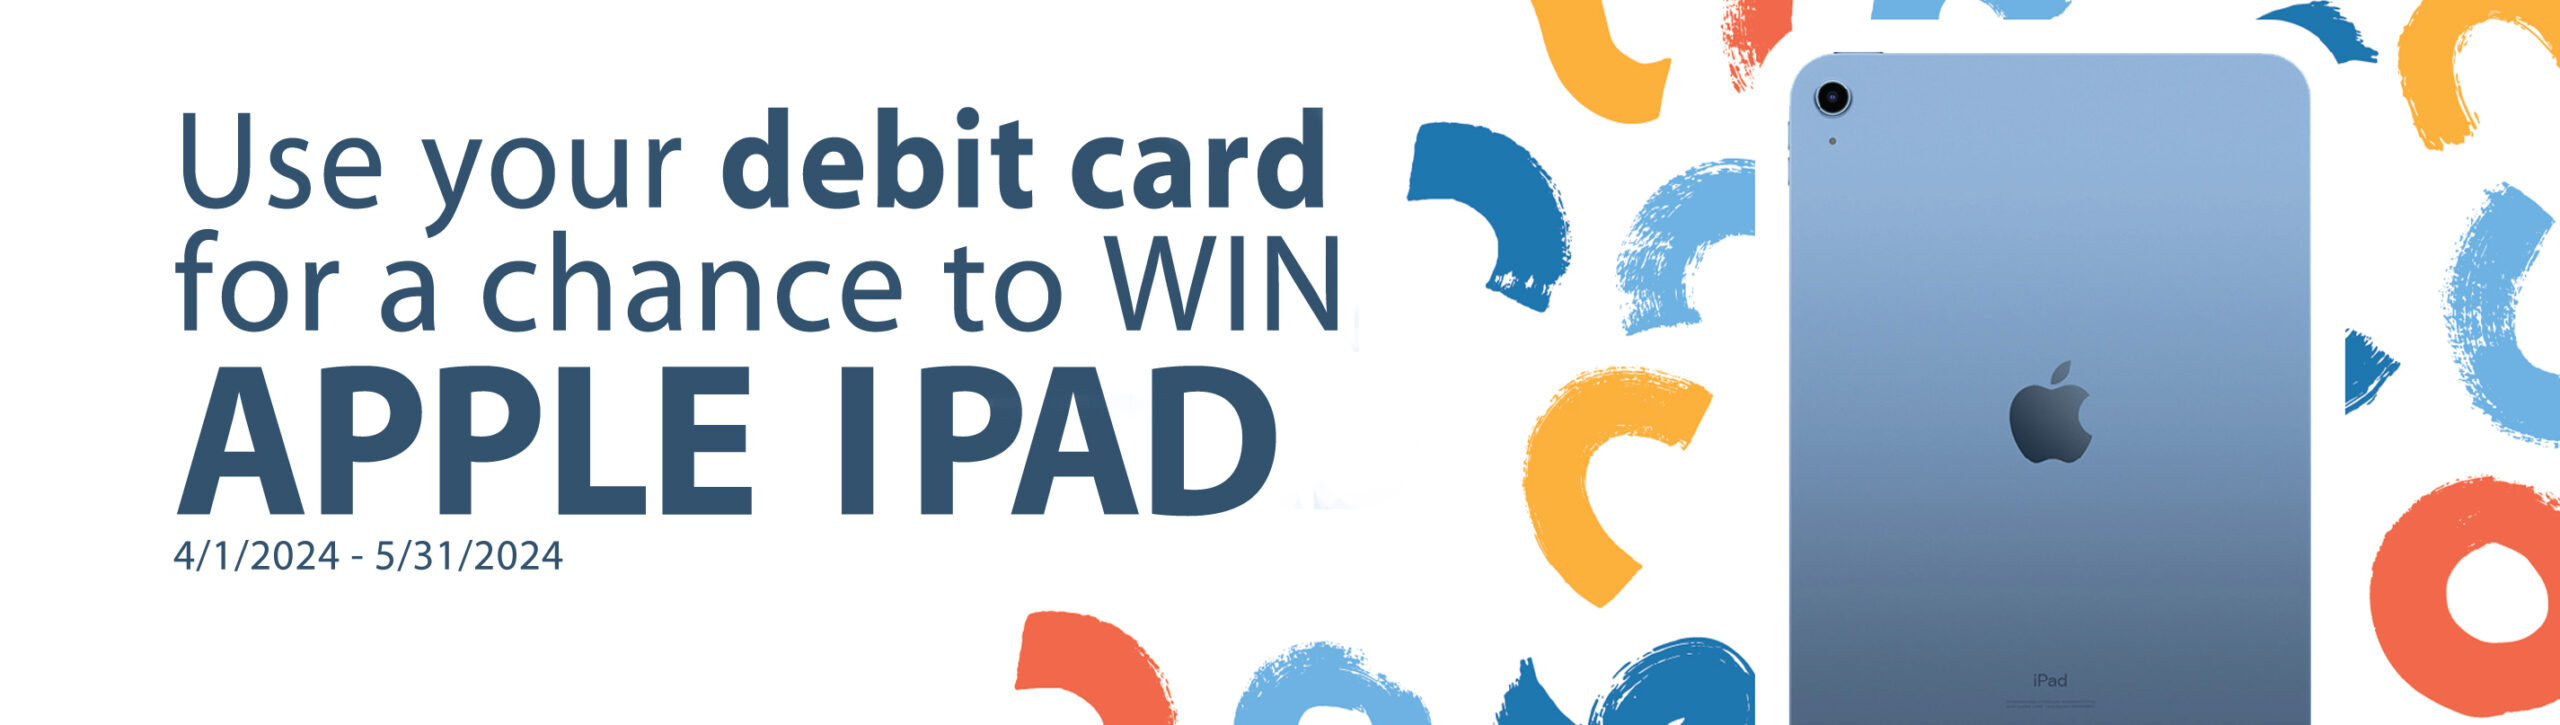 image of Apple IPad. text: Use our debit card for a chance to win an Apple I pad.